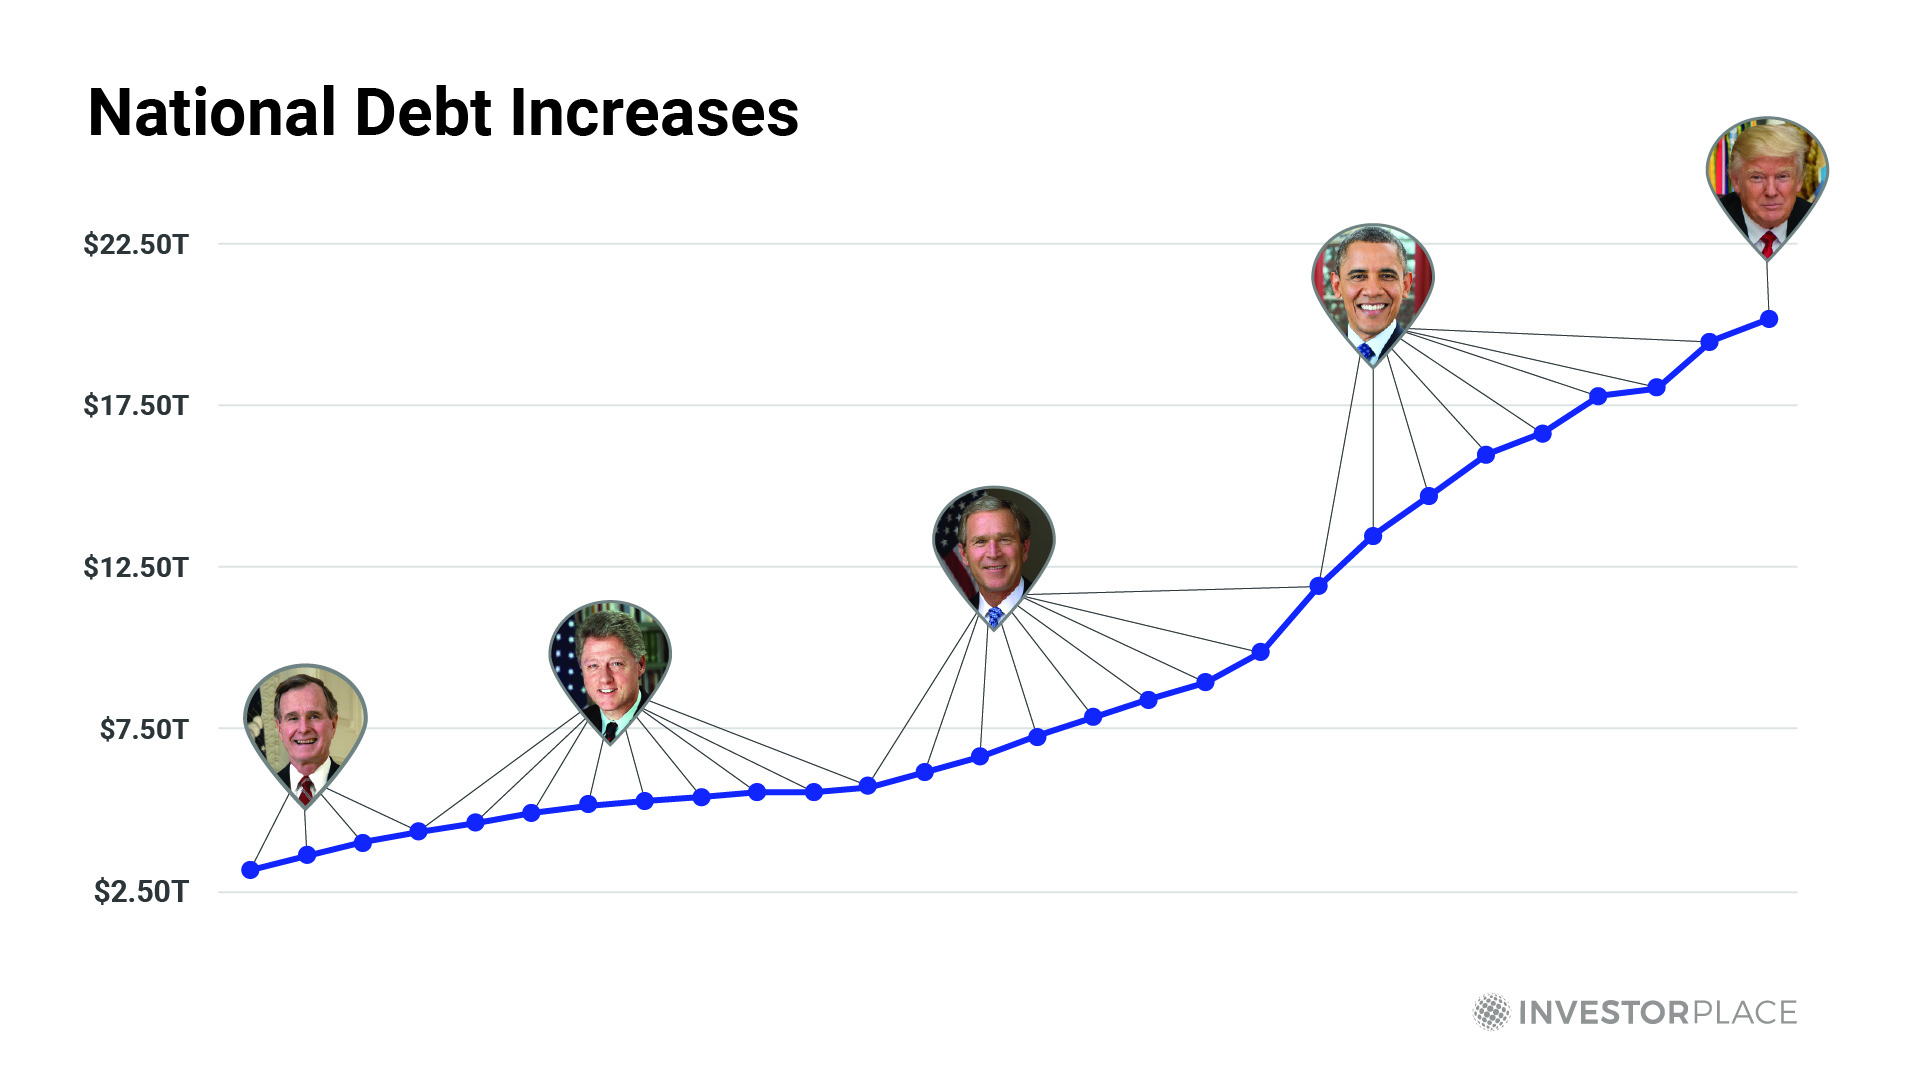 Image of national debt increases from George Bush through Donald Trump.